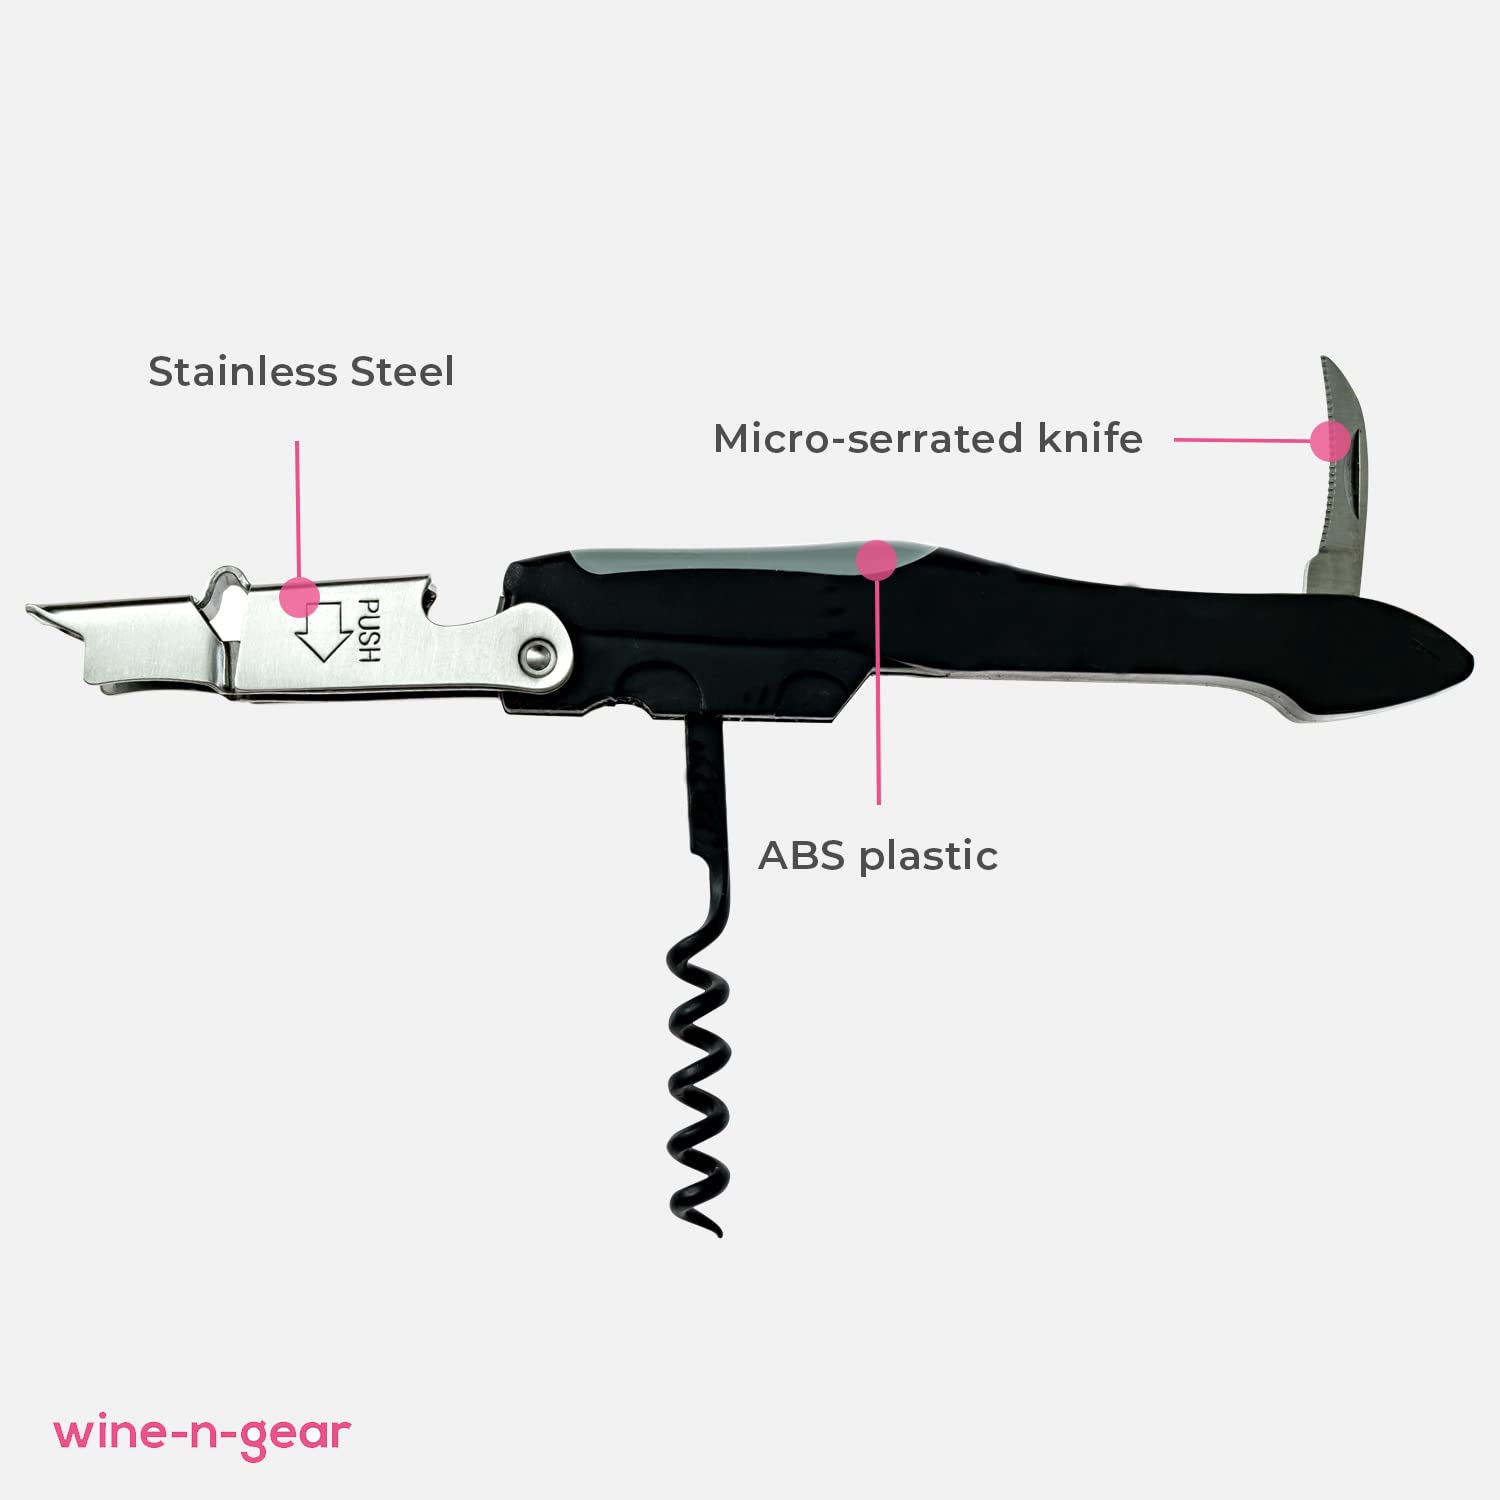 Coutale Sommelier Advantage Waiters Corkscrew - Black - Spring-Loaded Single-Lever Wine Bottle Opener with Sharp Foil-Cutter for Bartenders & Chefs - Kitchen Accessories and Gifts